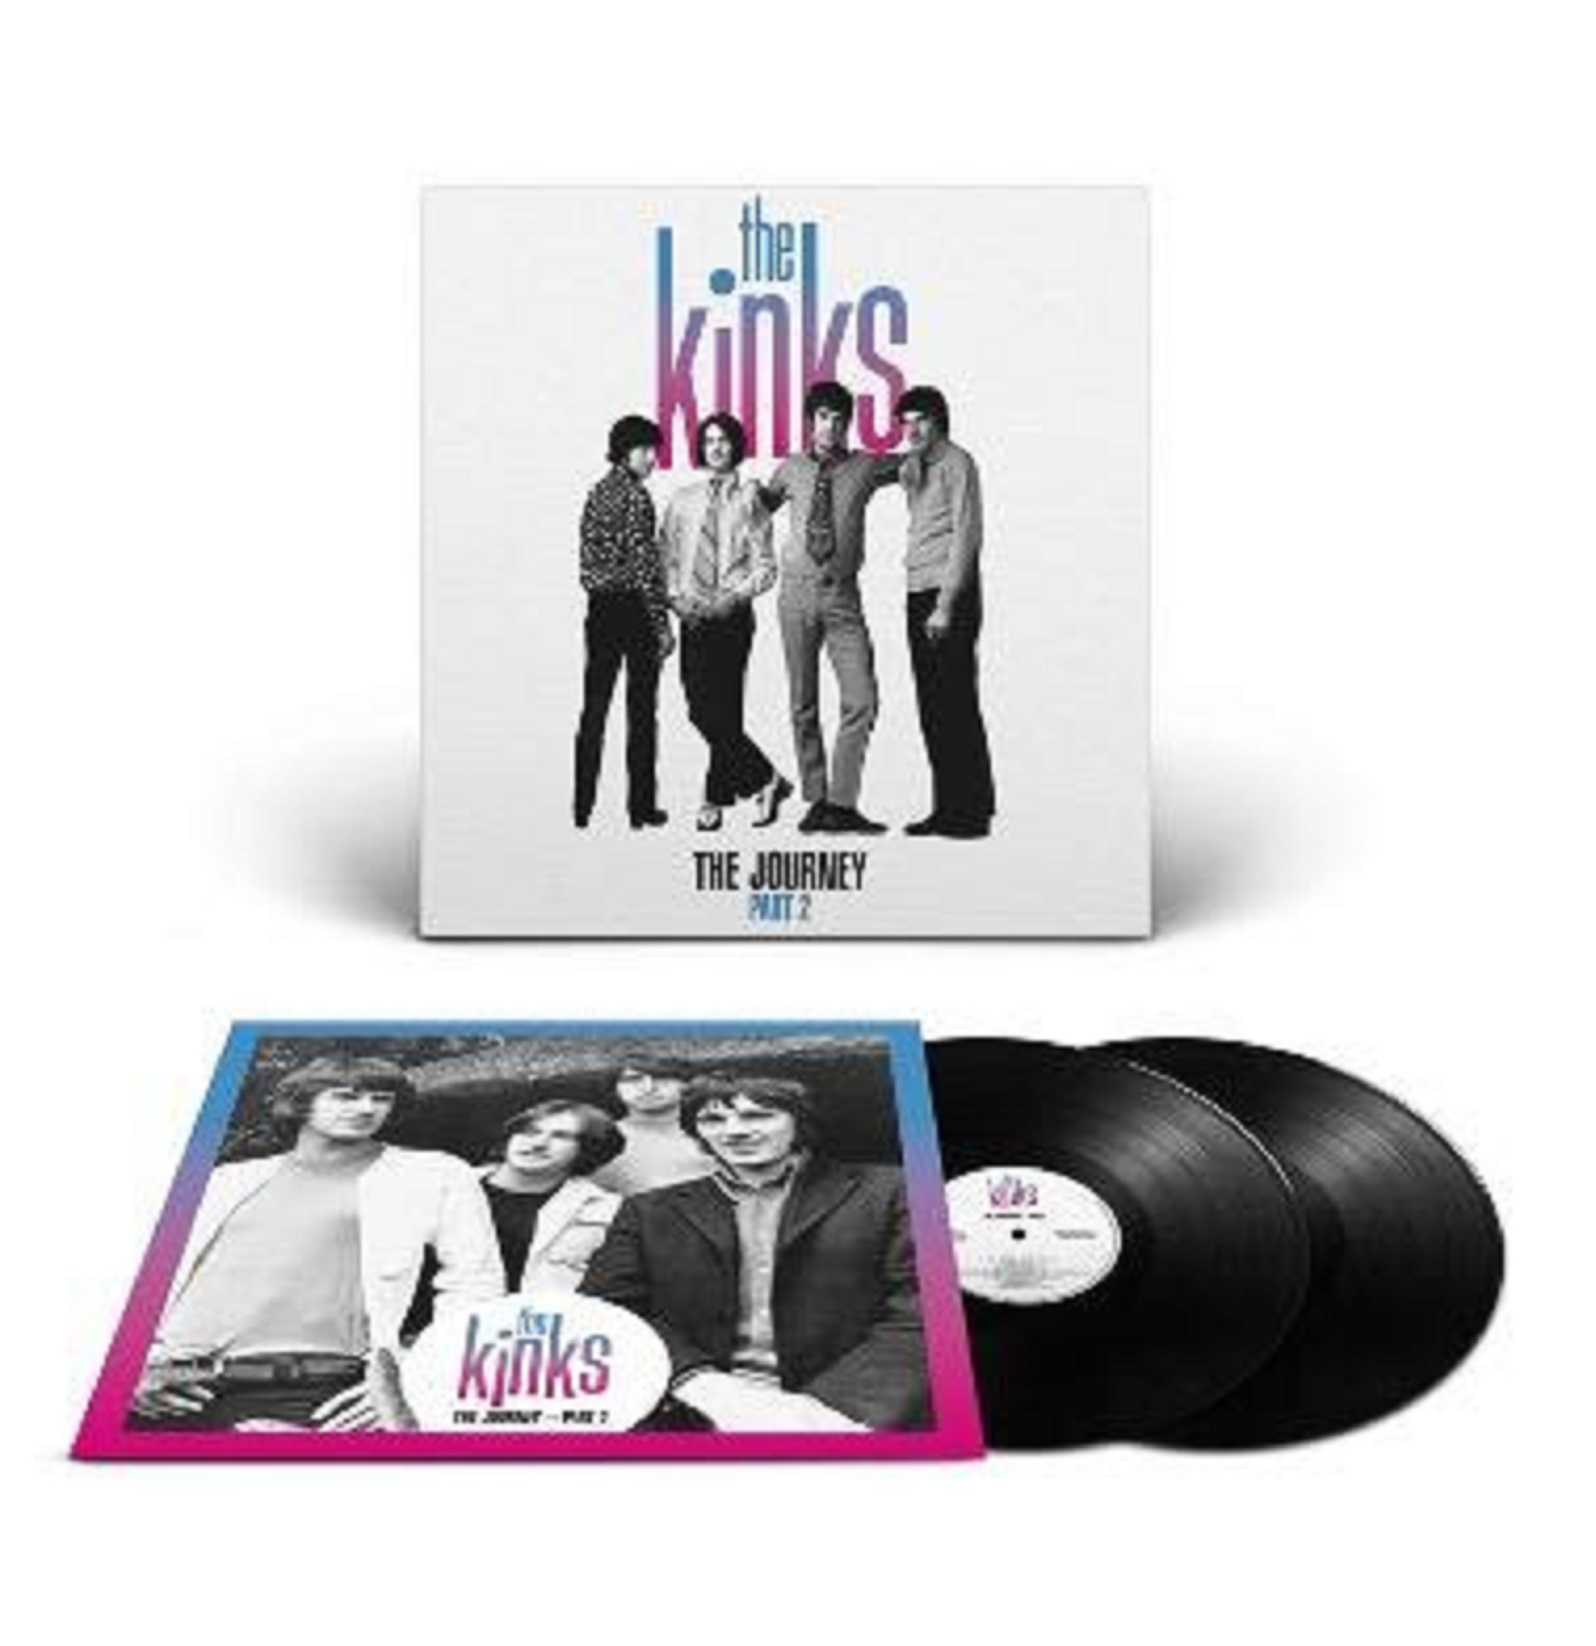 The Kinks The Journey - Part 2 Out November 17th via BMG